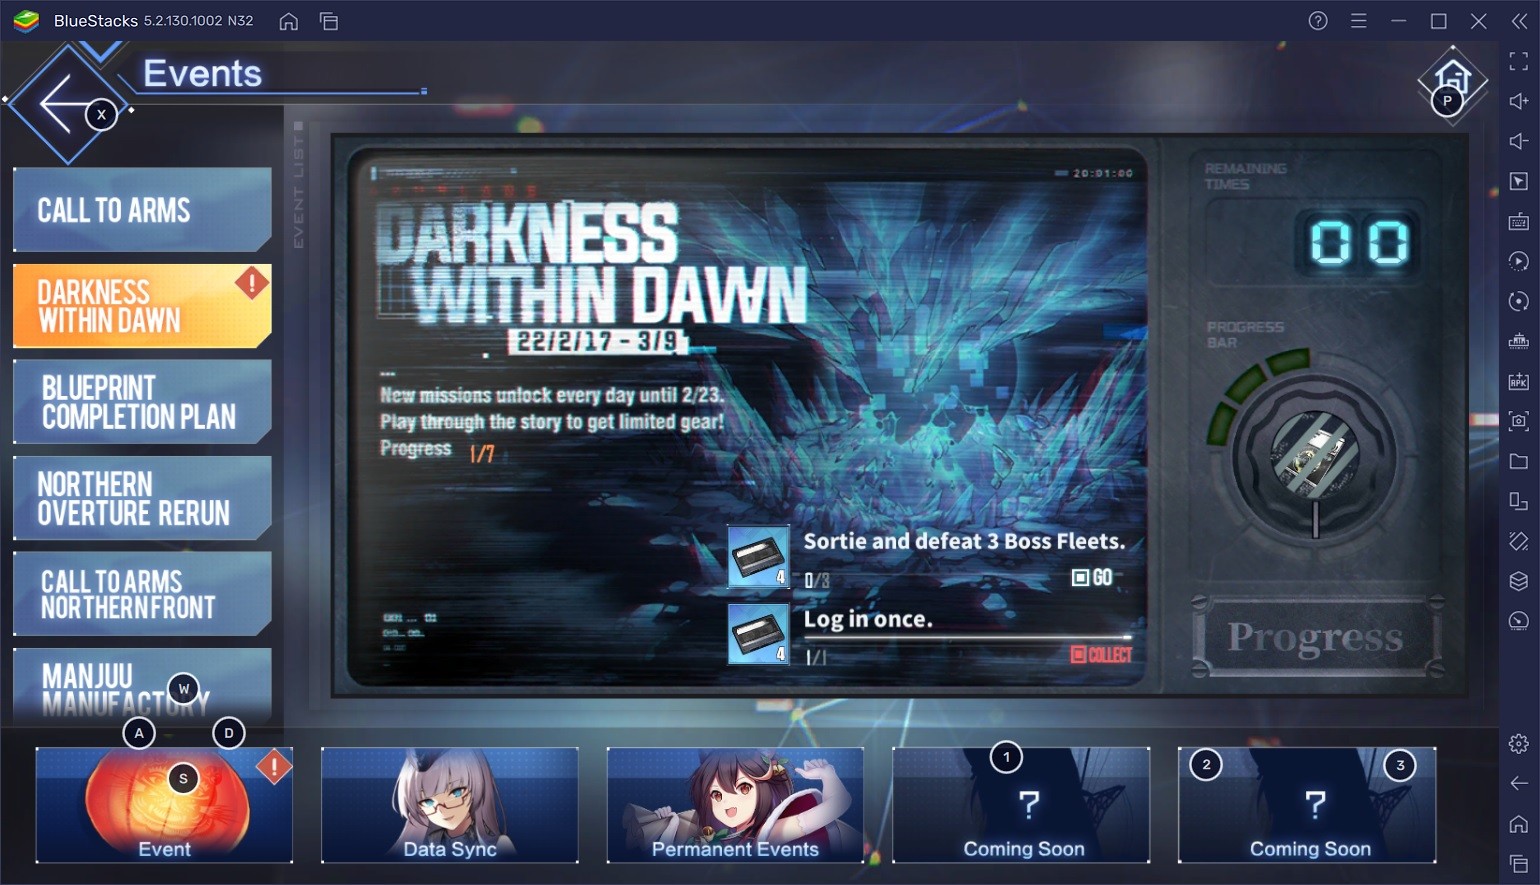  Brand New Event Darkness Within Dawn and More